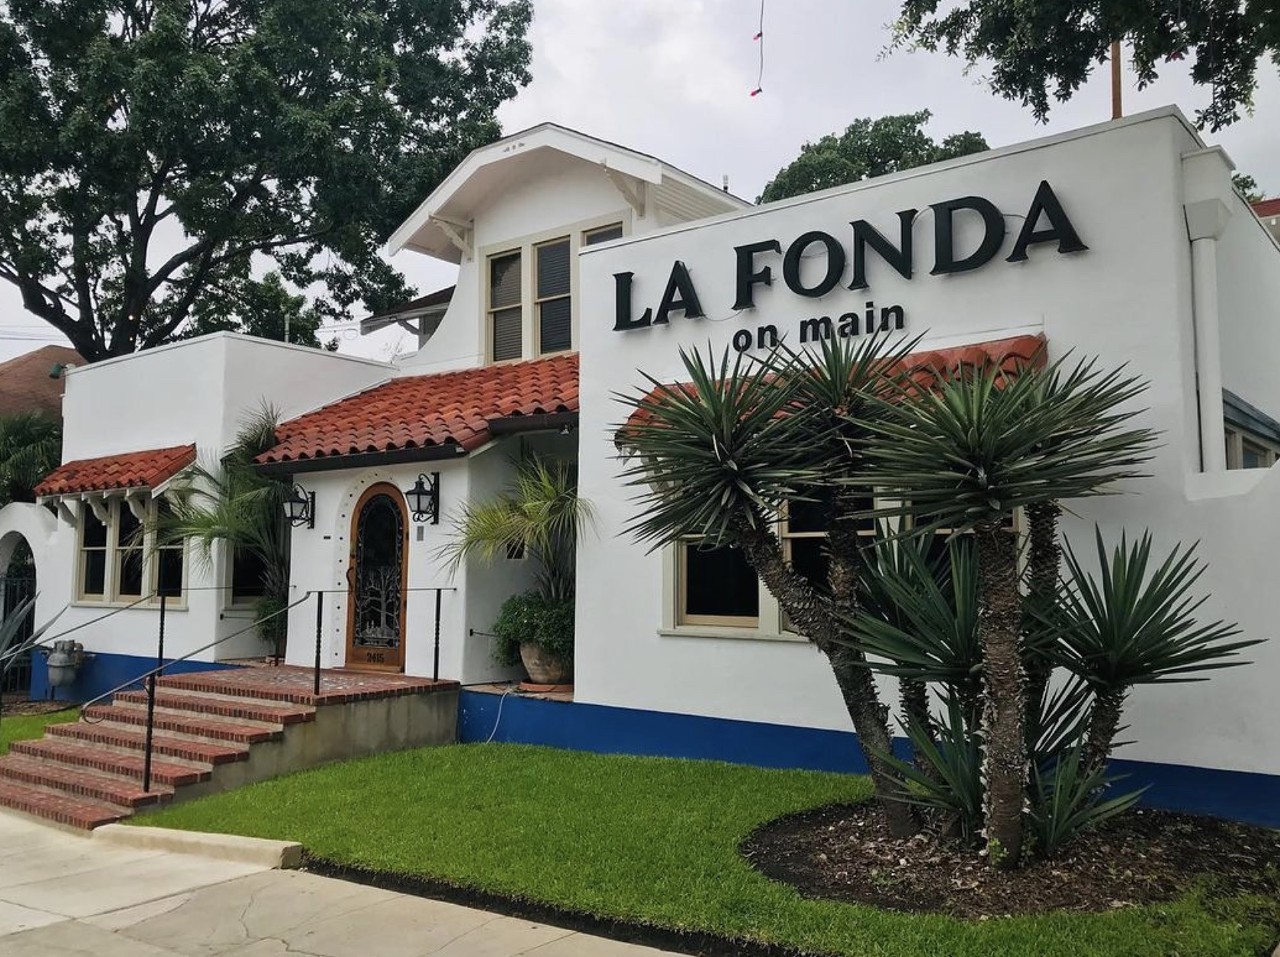 La Fonda on Main
2415 N Main Ave, (210) 733-0621, https://www.lafondaonmain.com/
La Fonda on Main bears the accolade of being one of the oldest Mexican restaurants in San Antonio, operating since 1932. The tropical patio is the perfect setting for cocktails with friends, and despite the restaurant's age, its take on south-of-the-border cuisine is anything but stodgy.